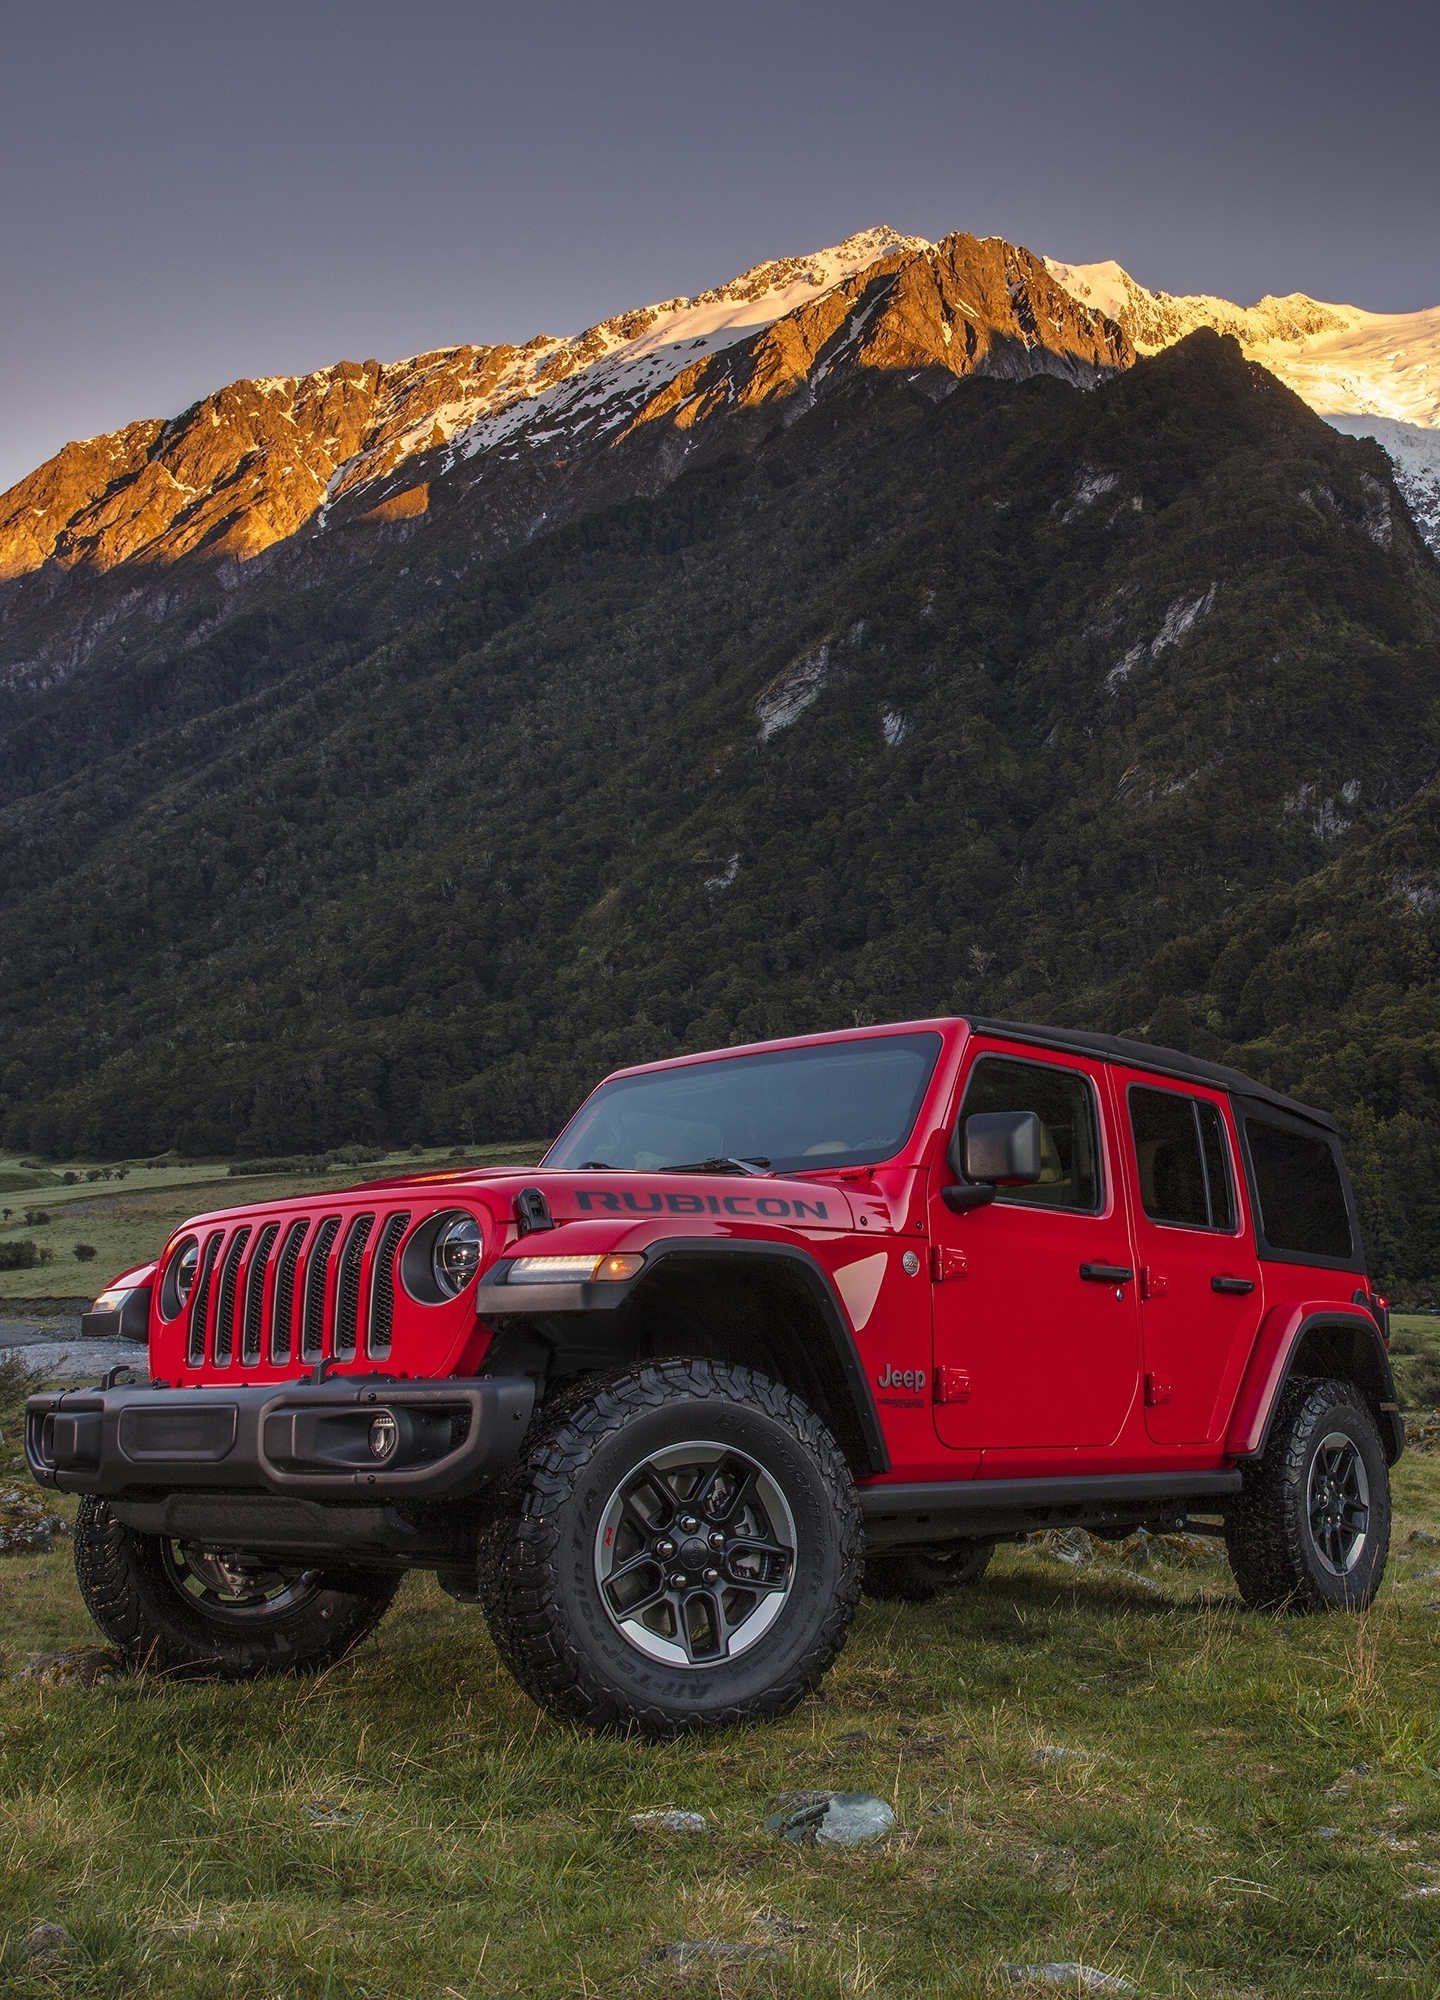 Download wallpaper 1440x2630 red, 4x4, suv, jeep wrangler, samsung galaxy  note 8, 1440x2630 hd background, 6606